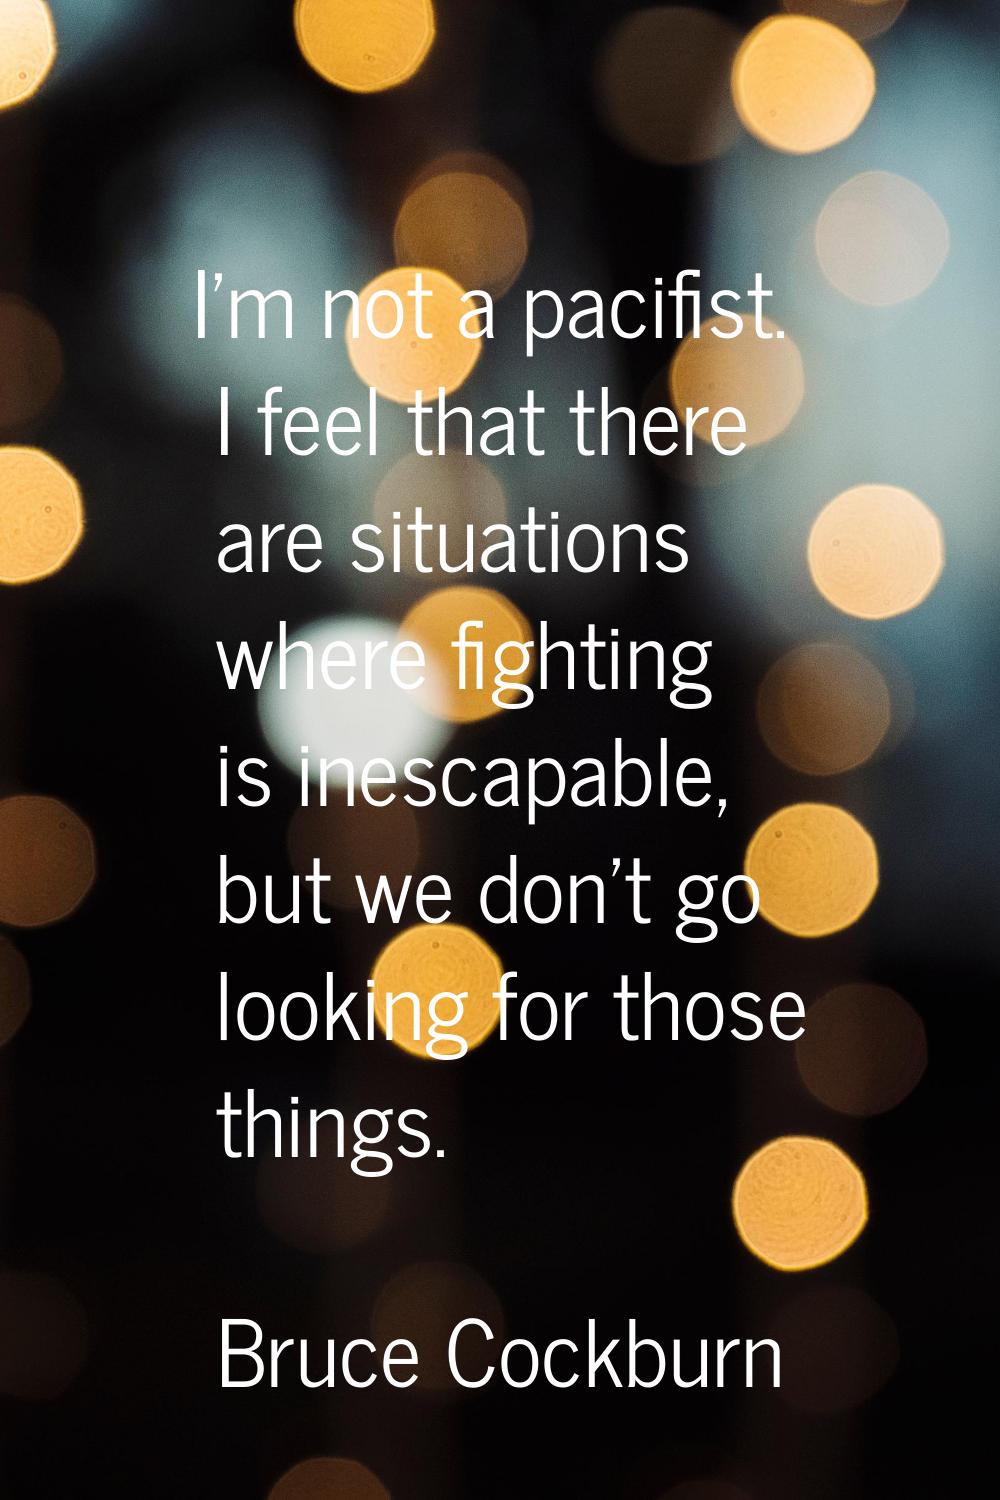 I'm not a pacifist. I feel that there are situations where fighting is inescapable, but we don't go